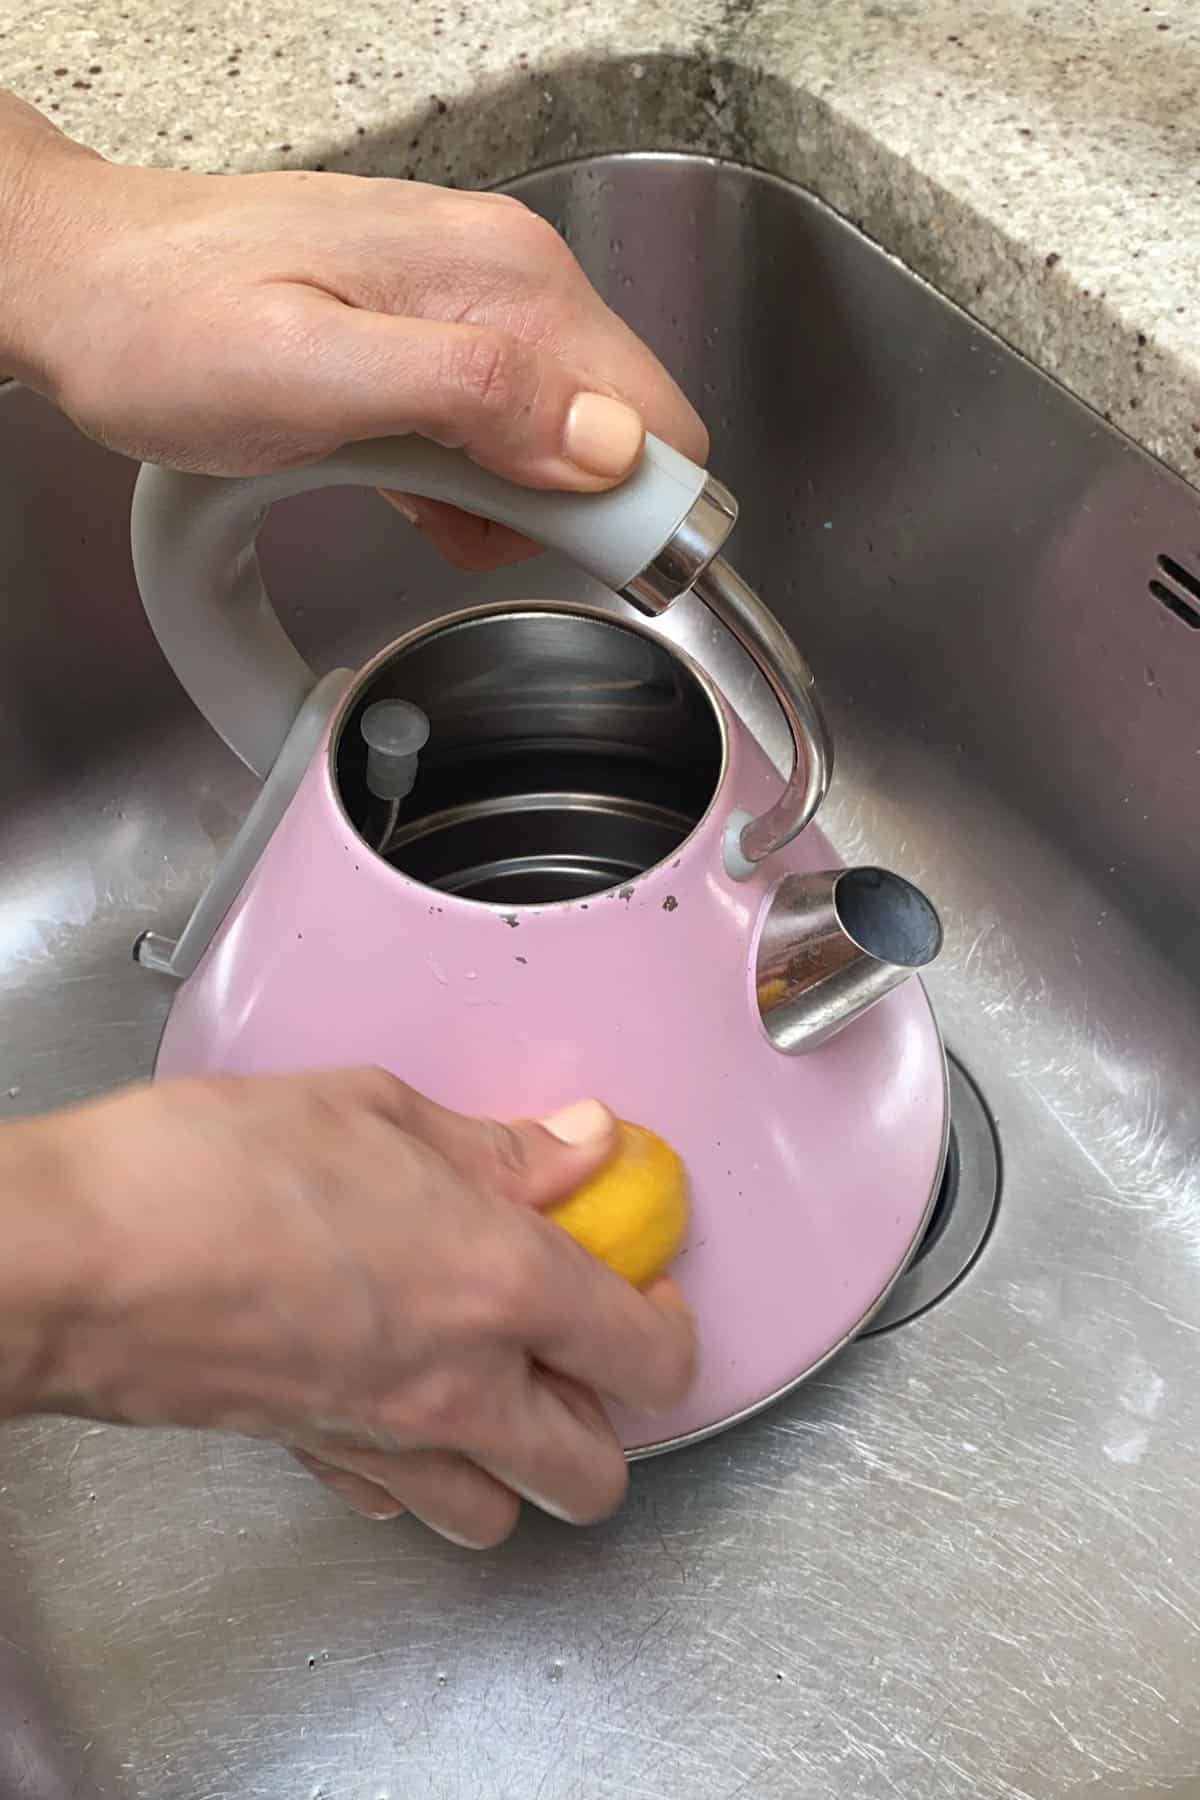 https://www.alphafoodie.com/wp-content/uploads/2021/05/How-to-naturally-clean-the-kettle-Cleaning-the-outside-of-kettle-with-lemon.jpeg